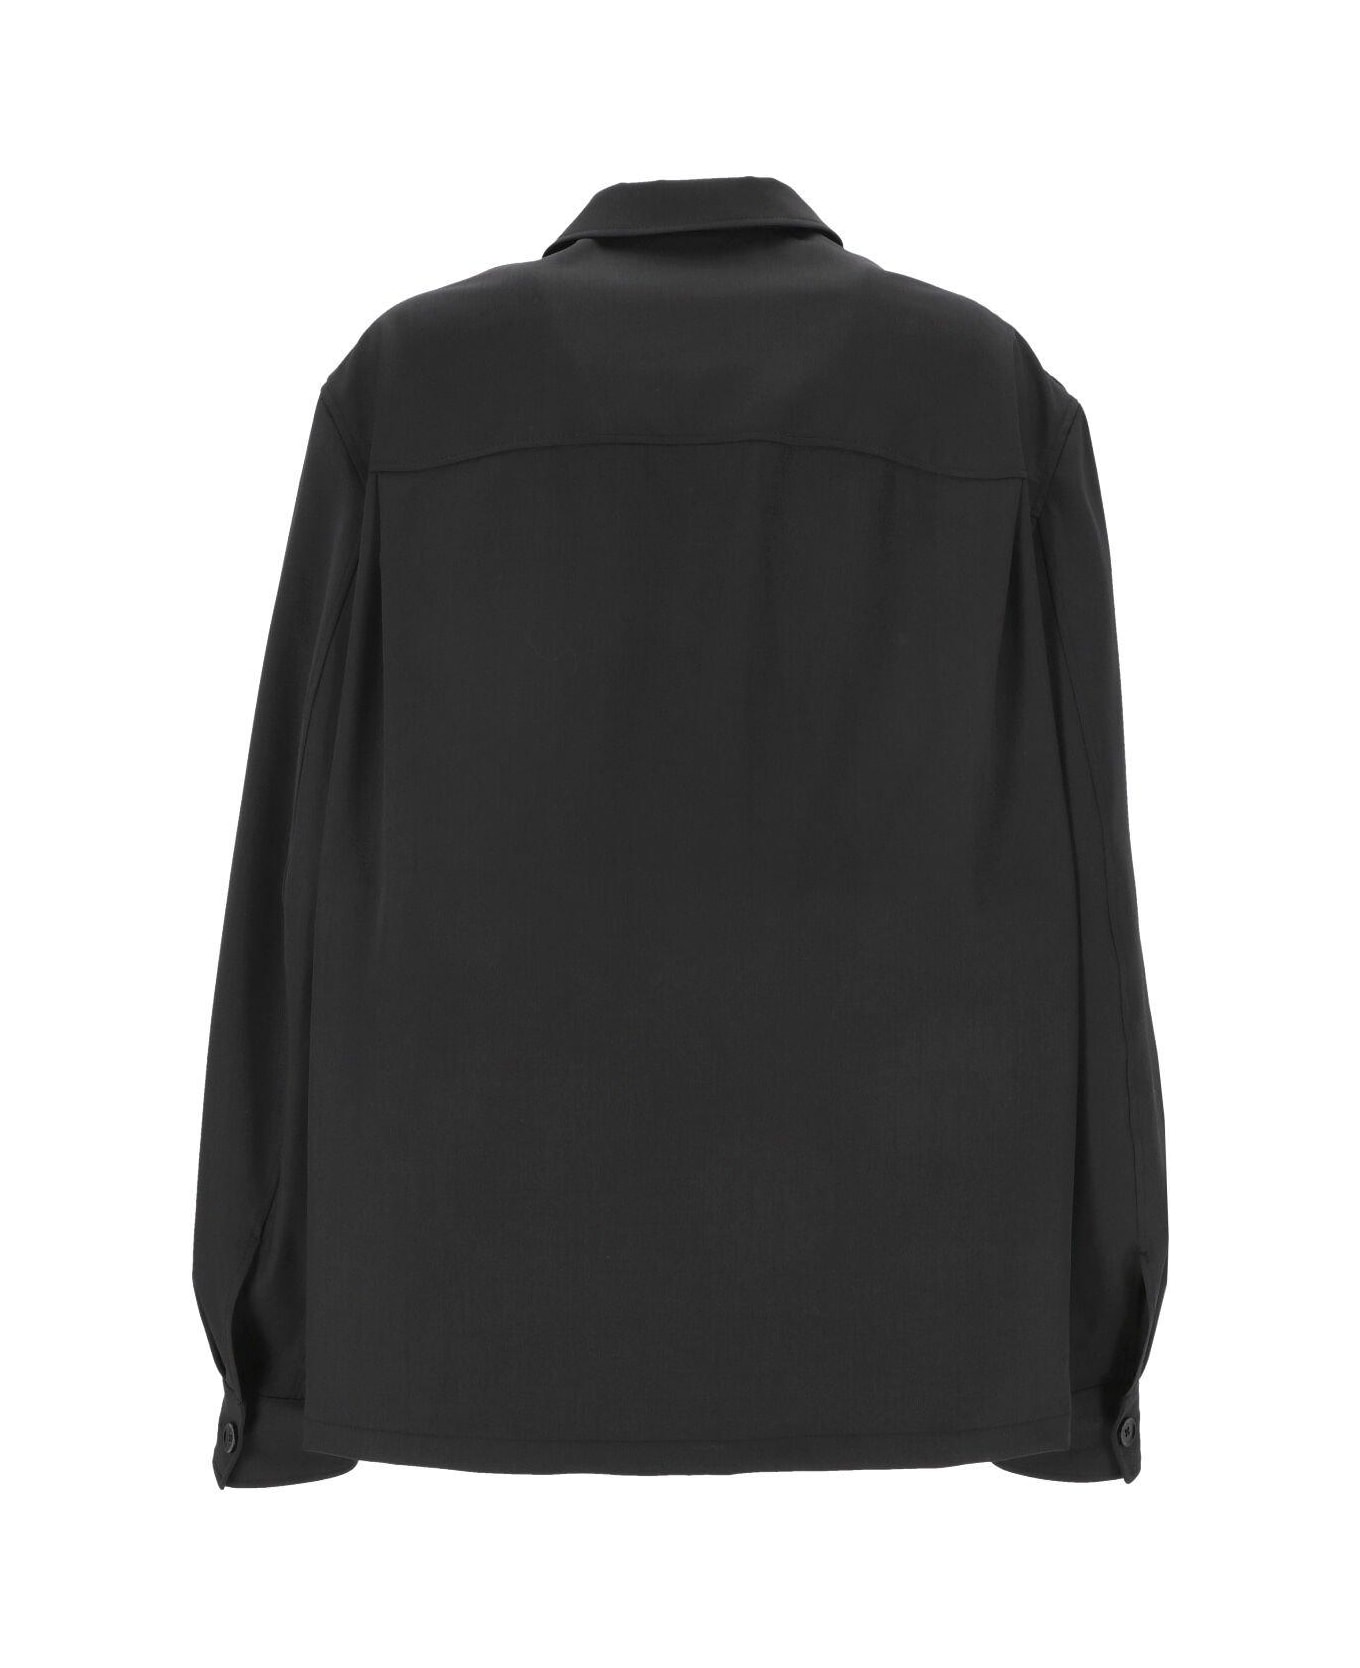 Lemaire Lon Sleeved Buttoned Shirt Jacket - BLACK